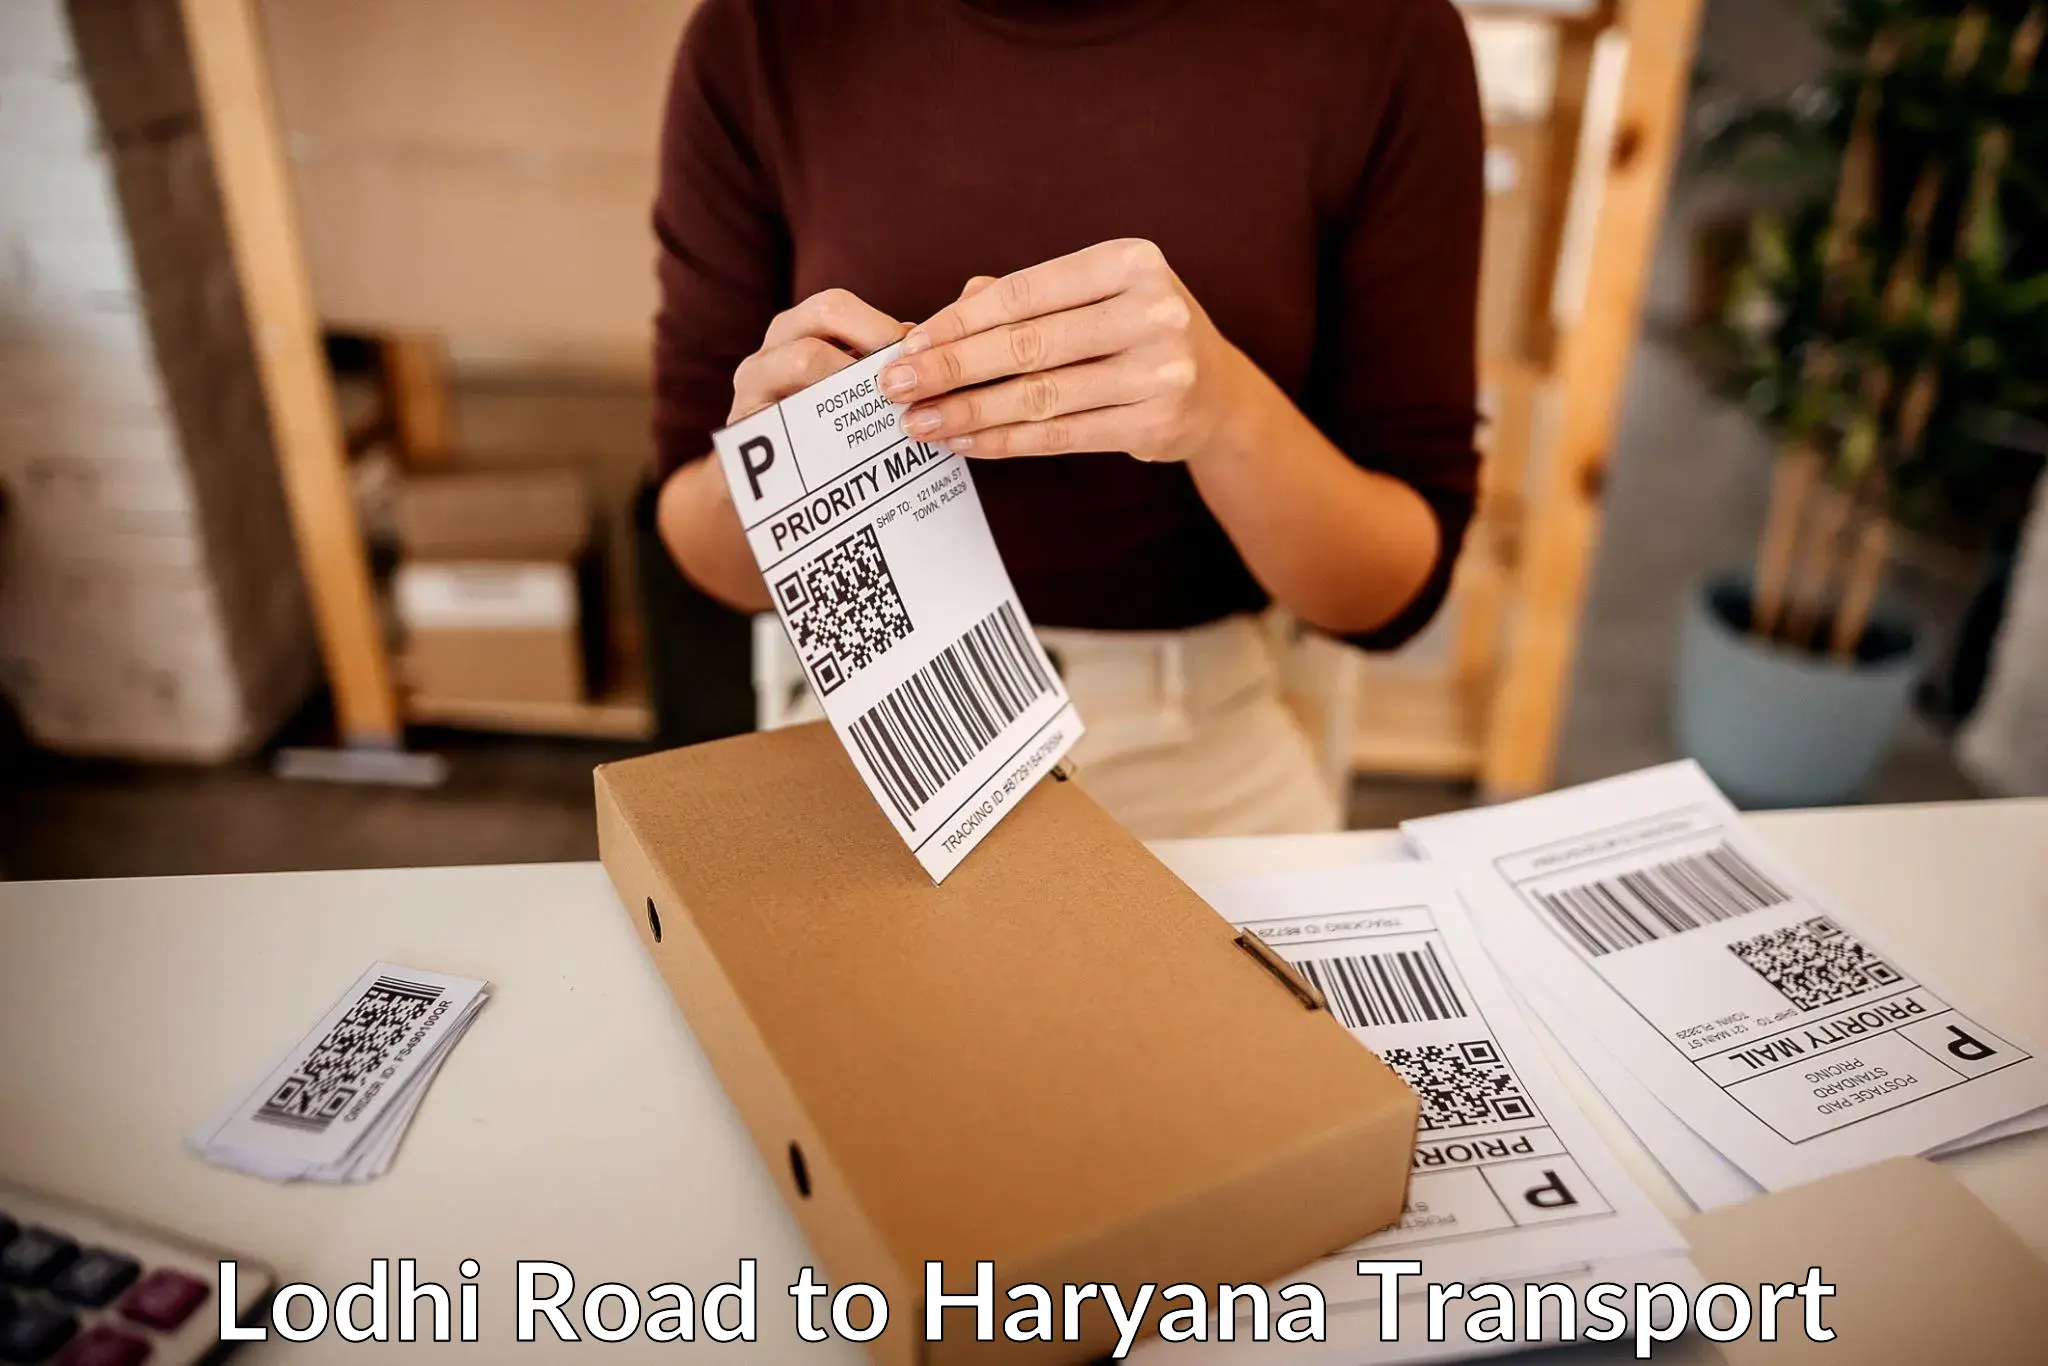 Commercial transport service Lodhi Road to Haryana